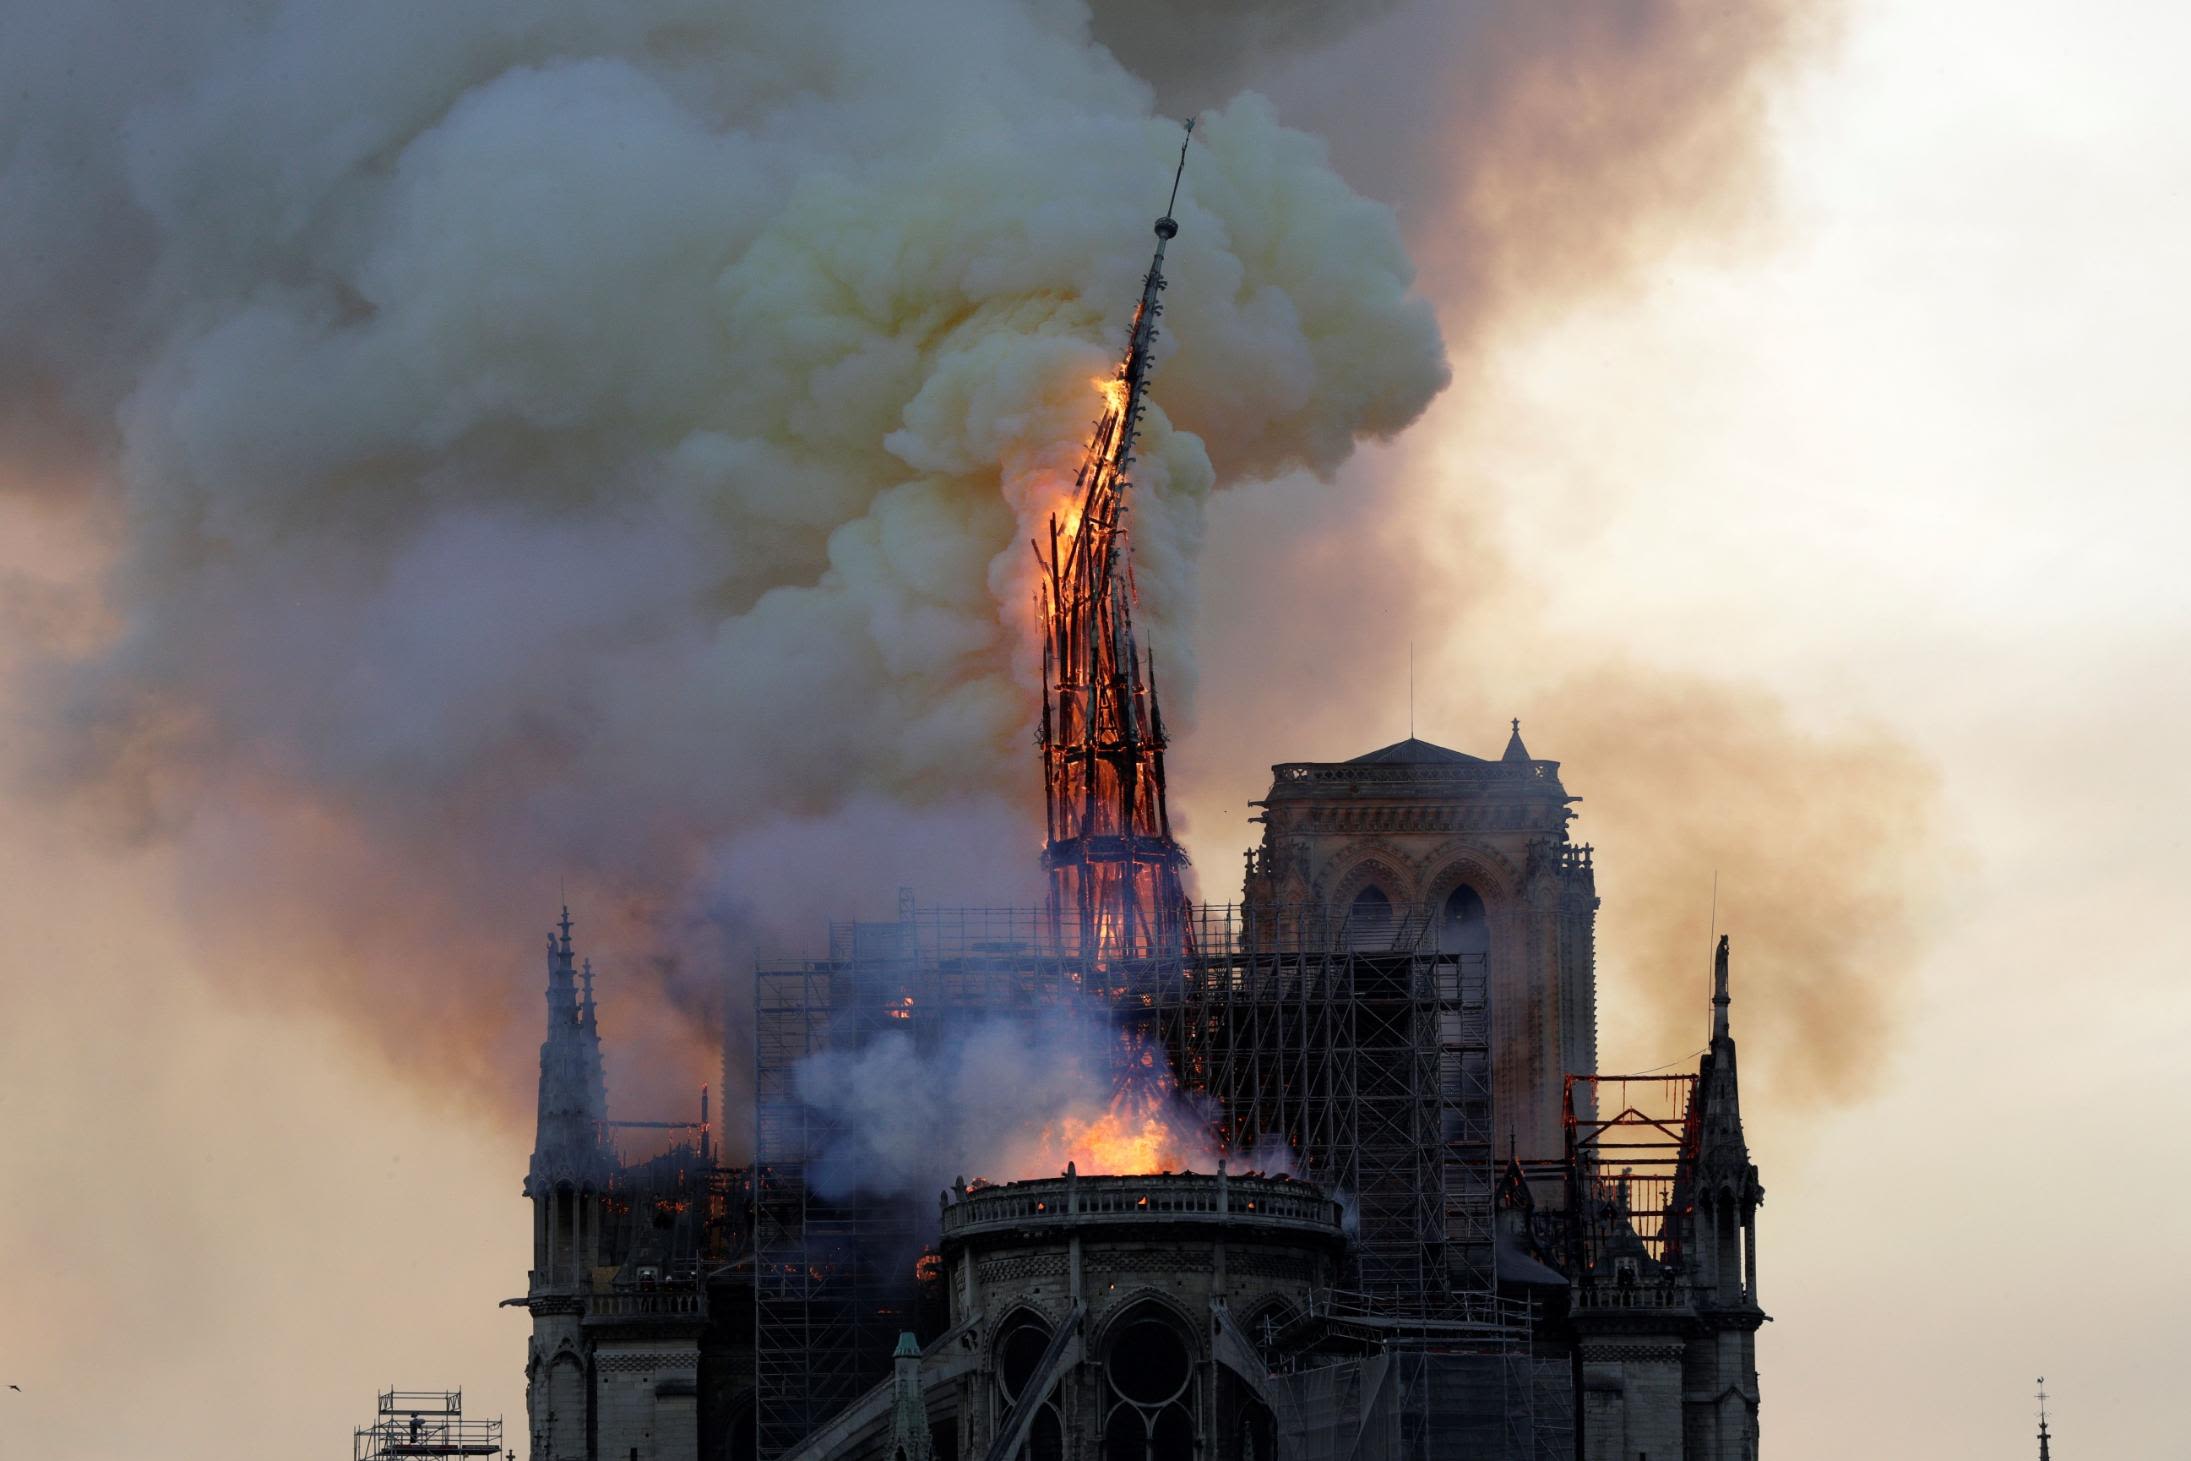 In pictures: Notre Dame cathedral fire damage | CNN